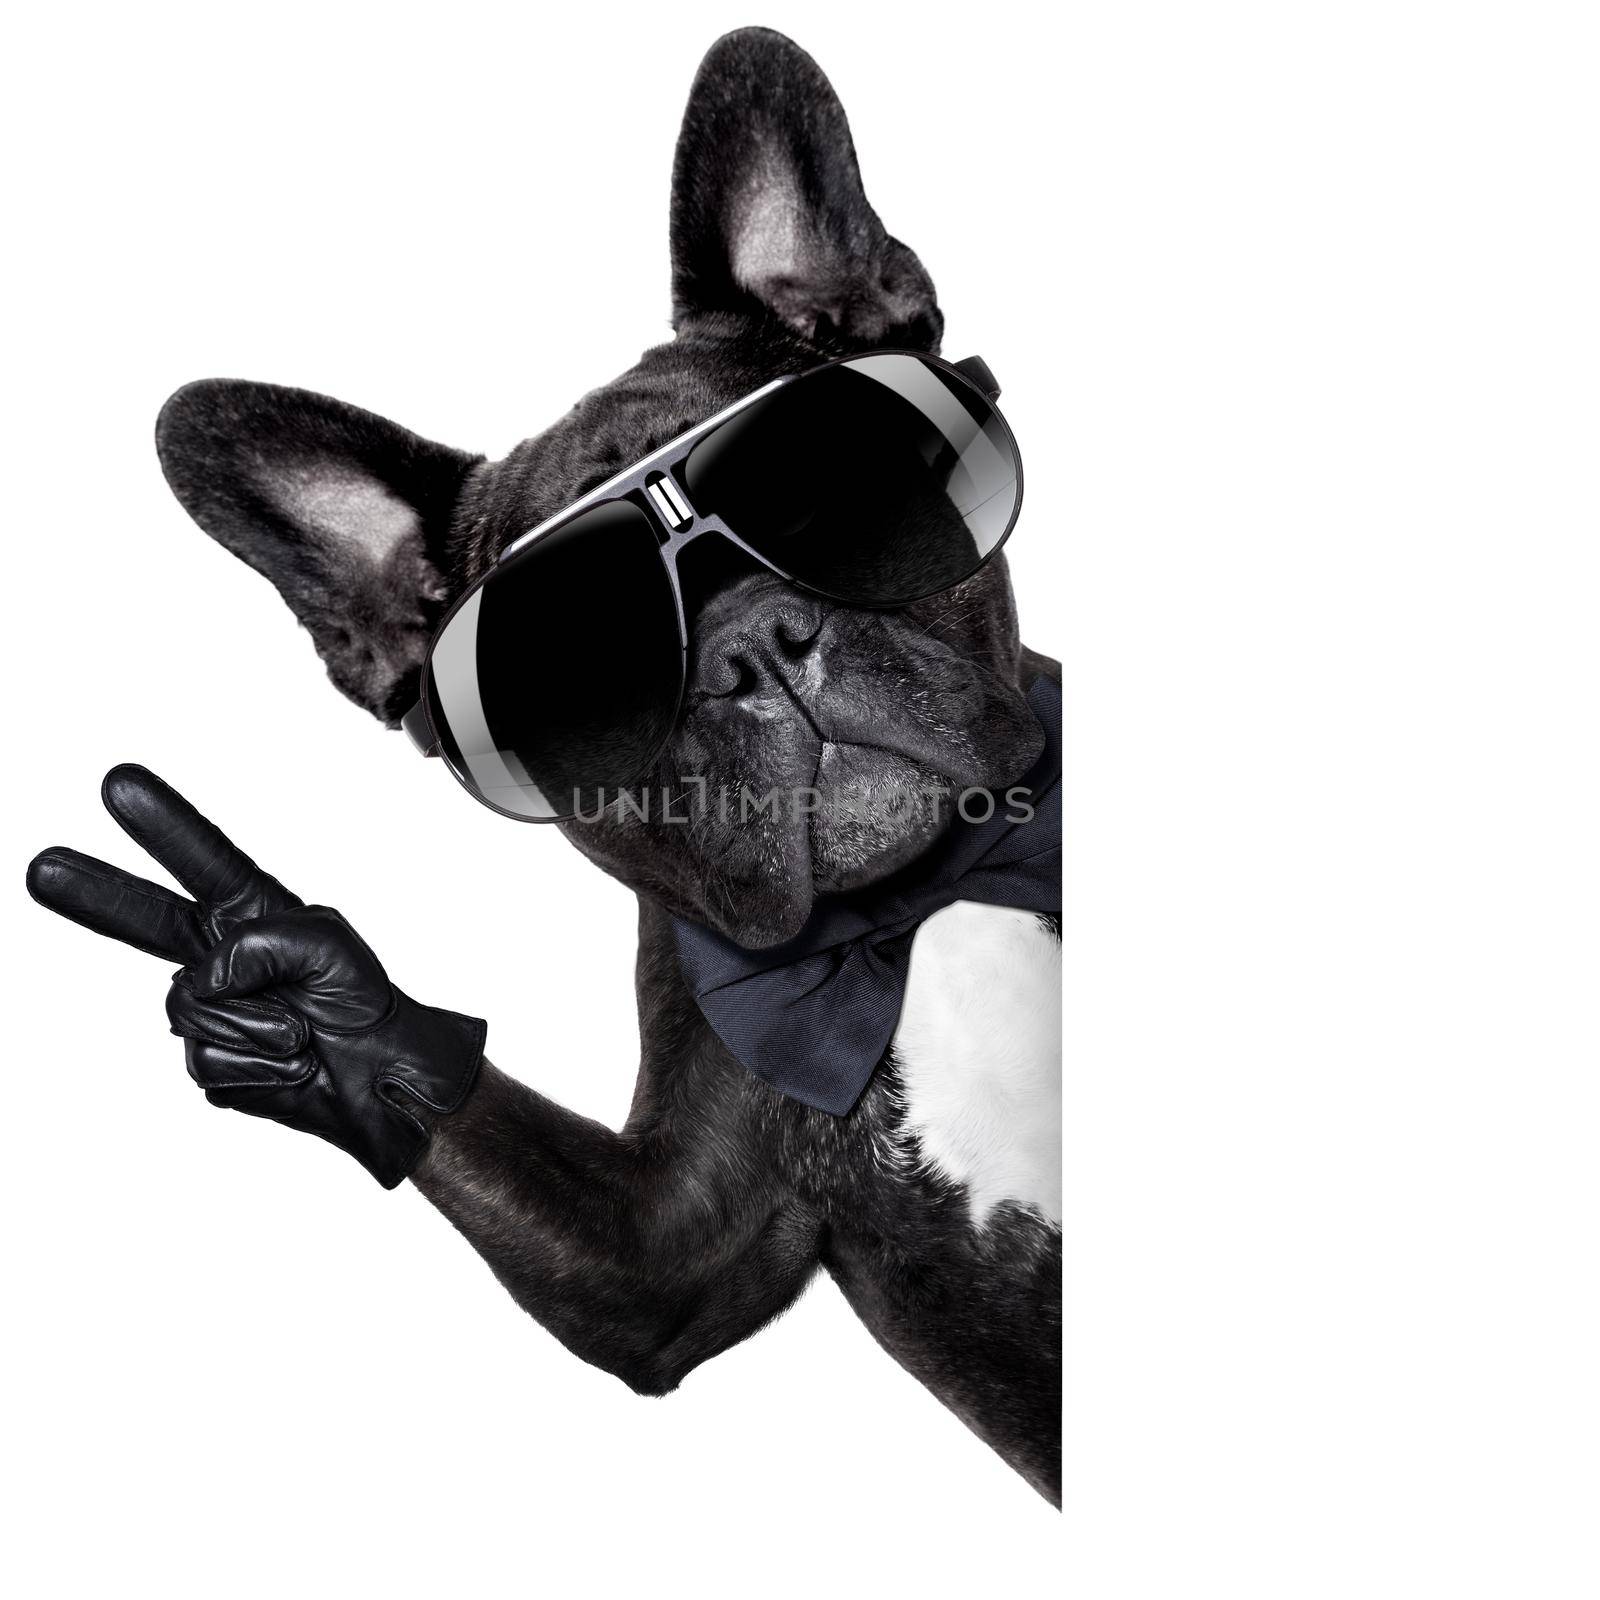 cool dog with peace or victory fingers beside a white blank banner or placard